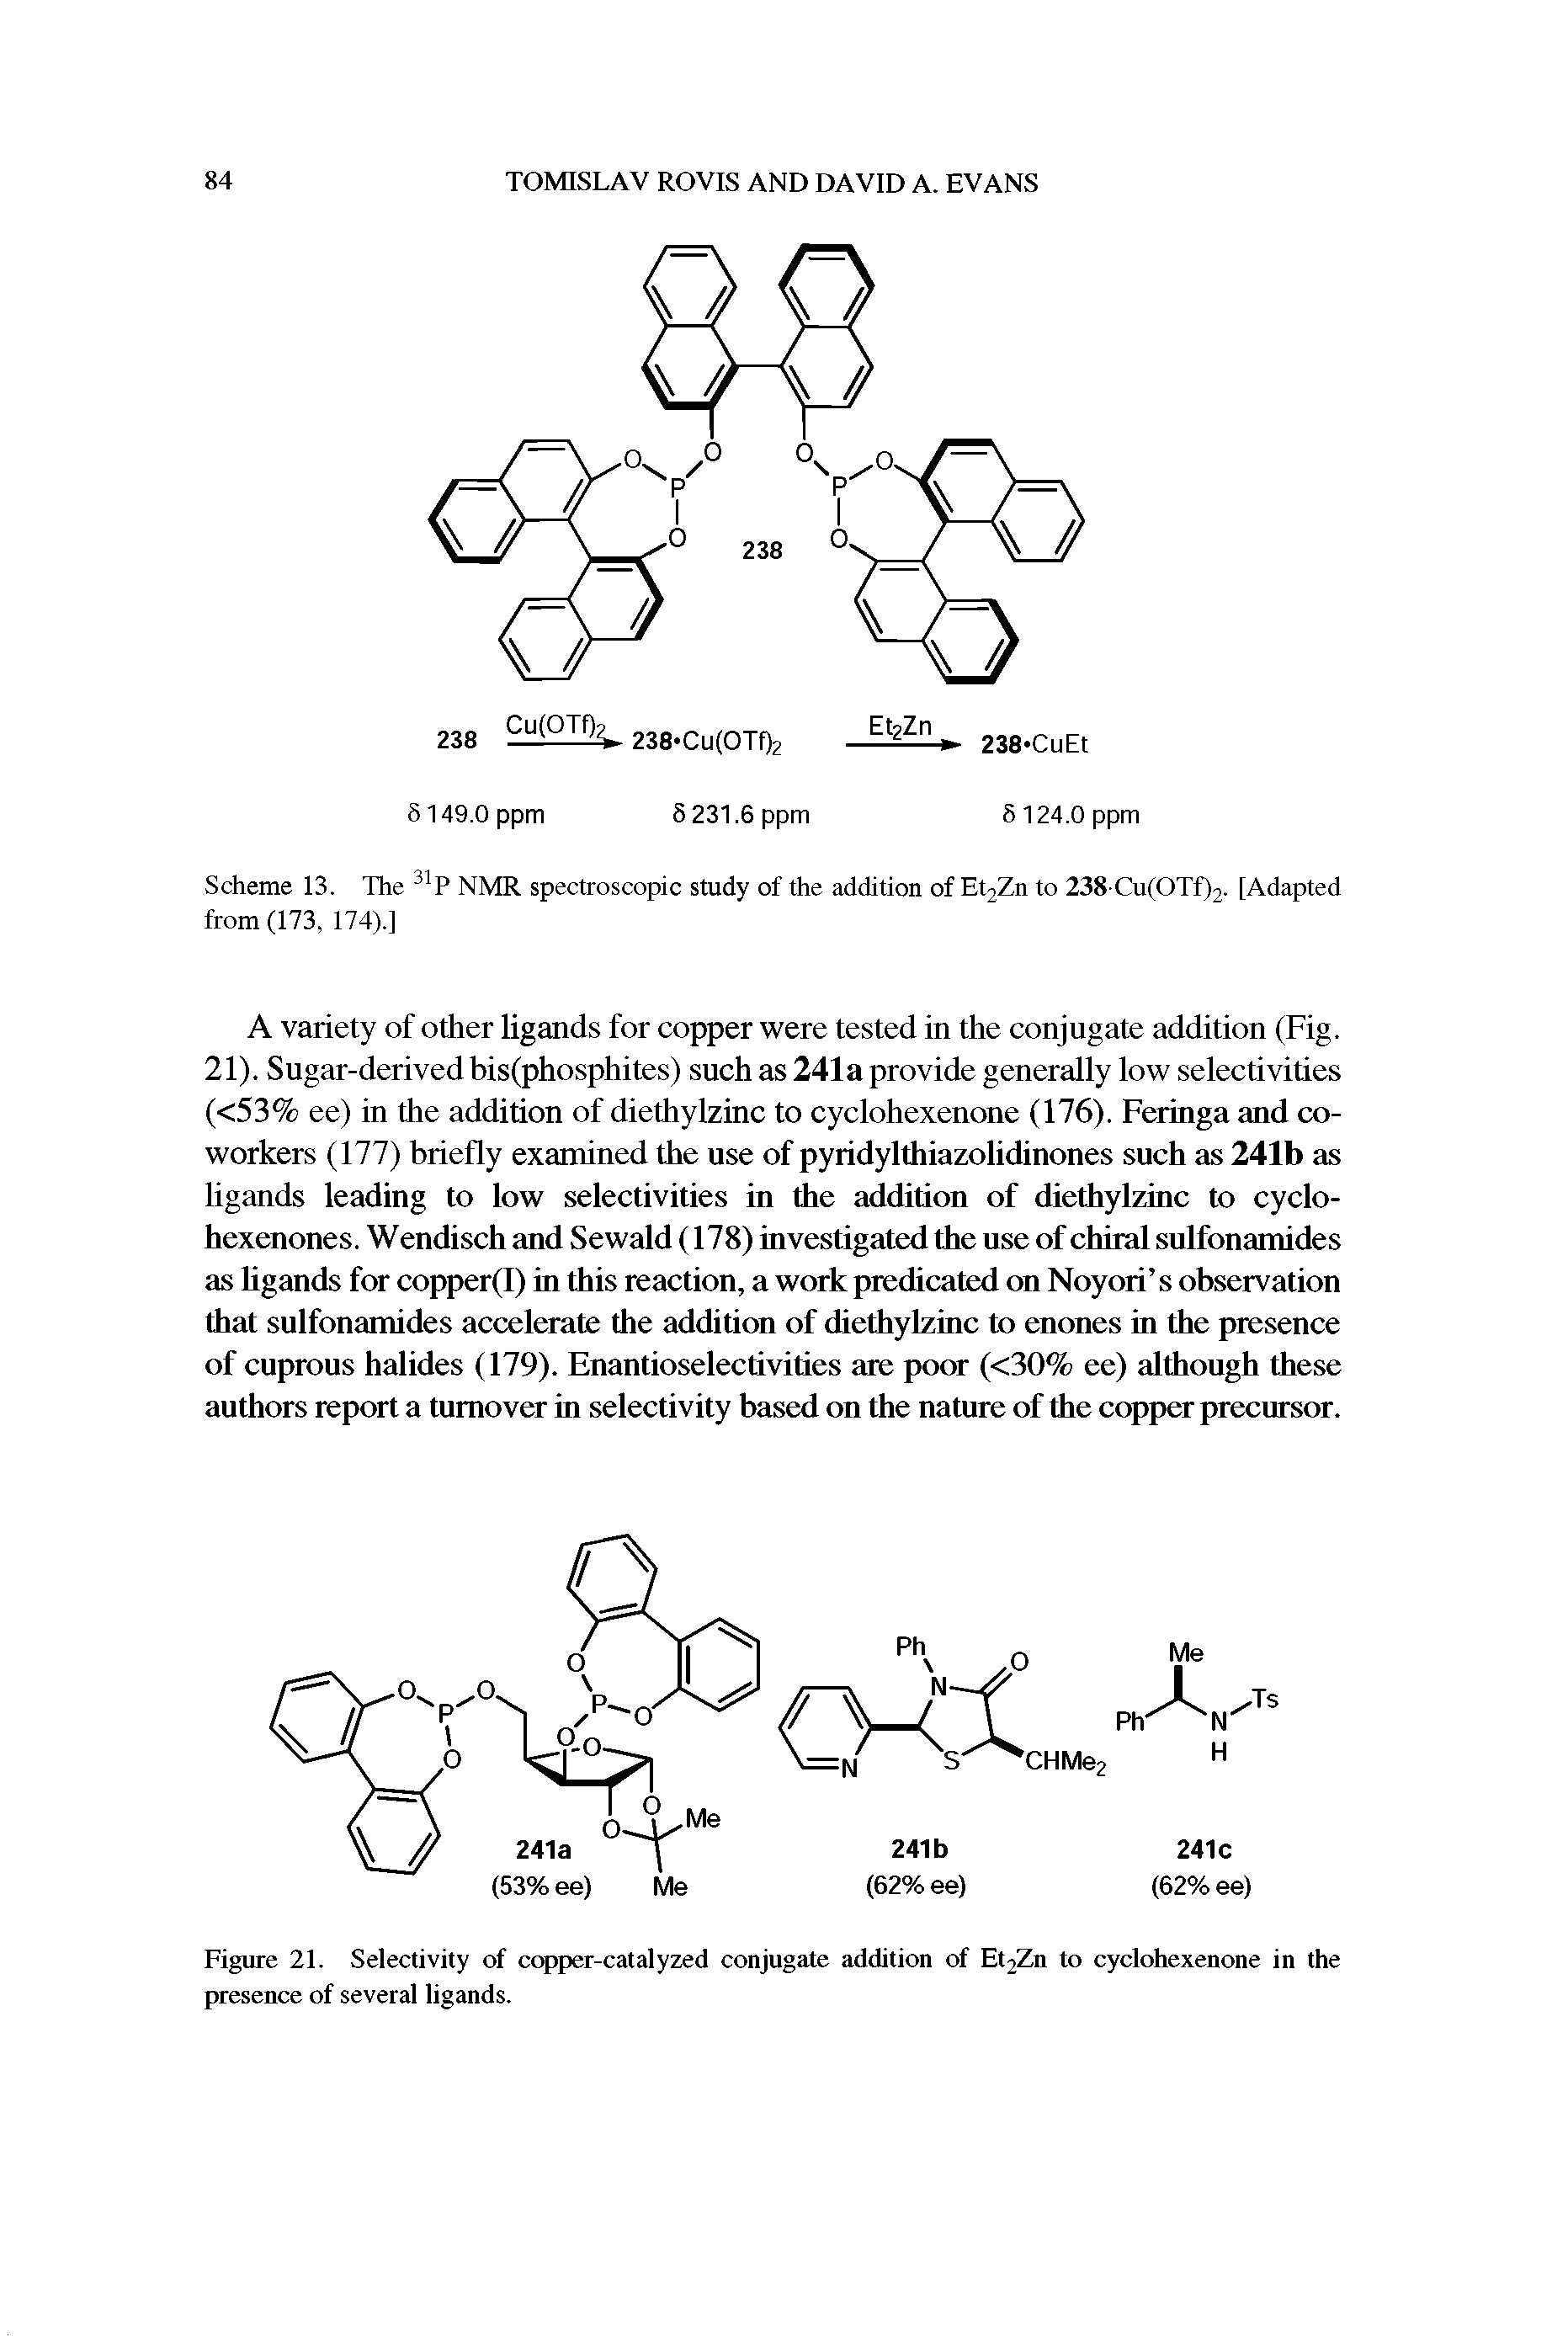 Figure 21. Selectivity of copper-catalyzed conjugate addition of Et2Zn to cyclohexenone in the presence of several ligands.